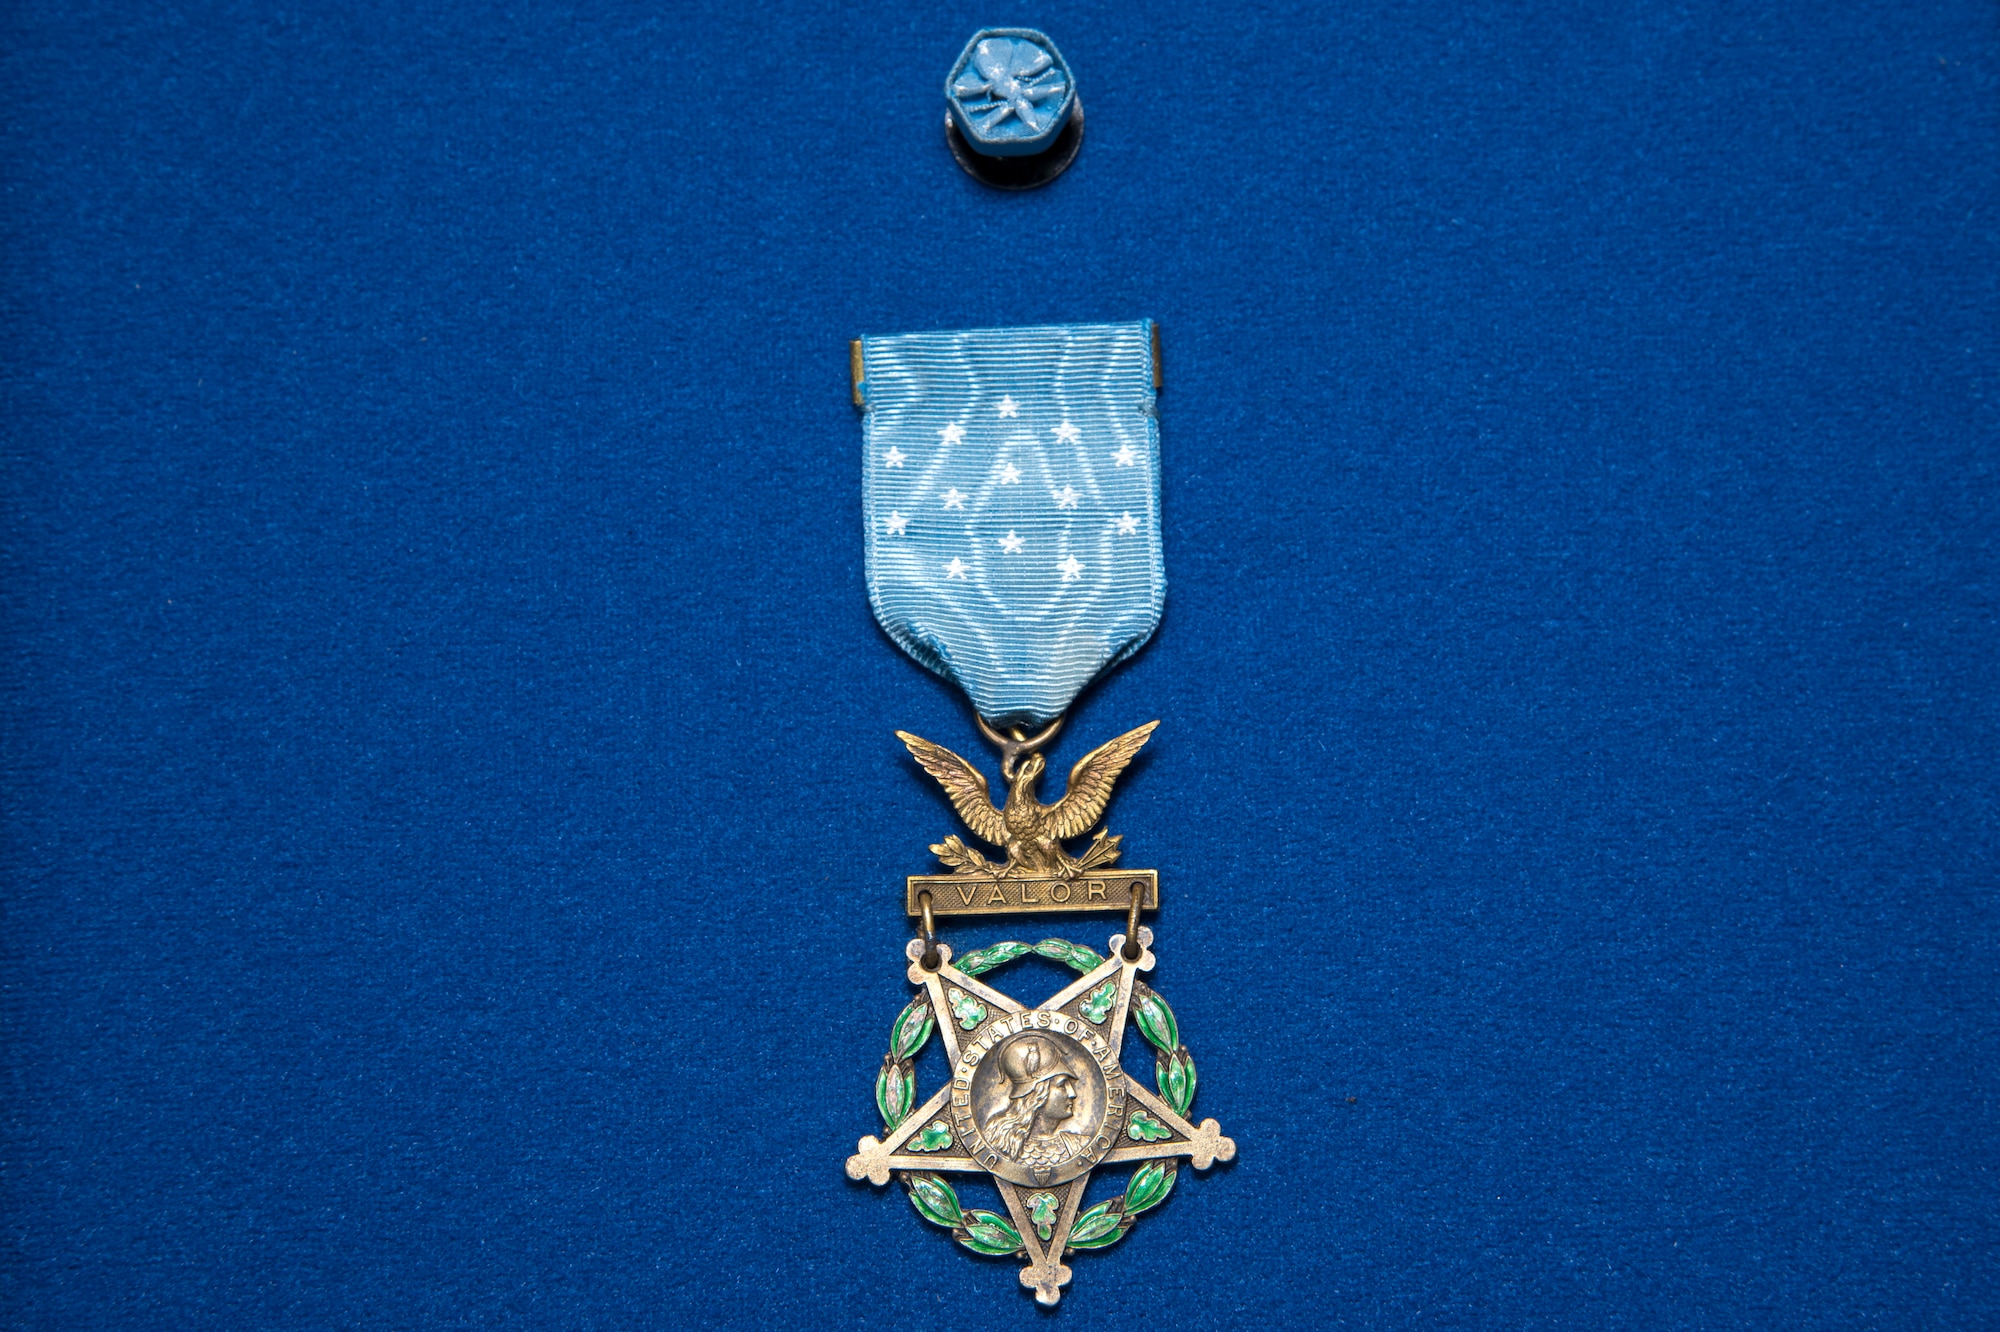 WWI pilot Lt. Frank Luke Jr. Medal of Honor on display in the Early Years Gallery at the National Museum of the U.S. Air Force. (U.S. Air Force photo by Ken LaRock)